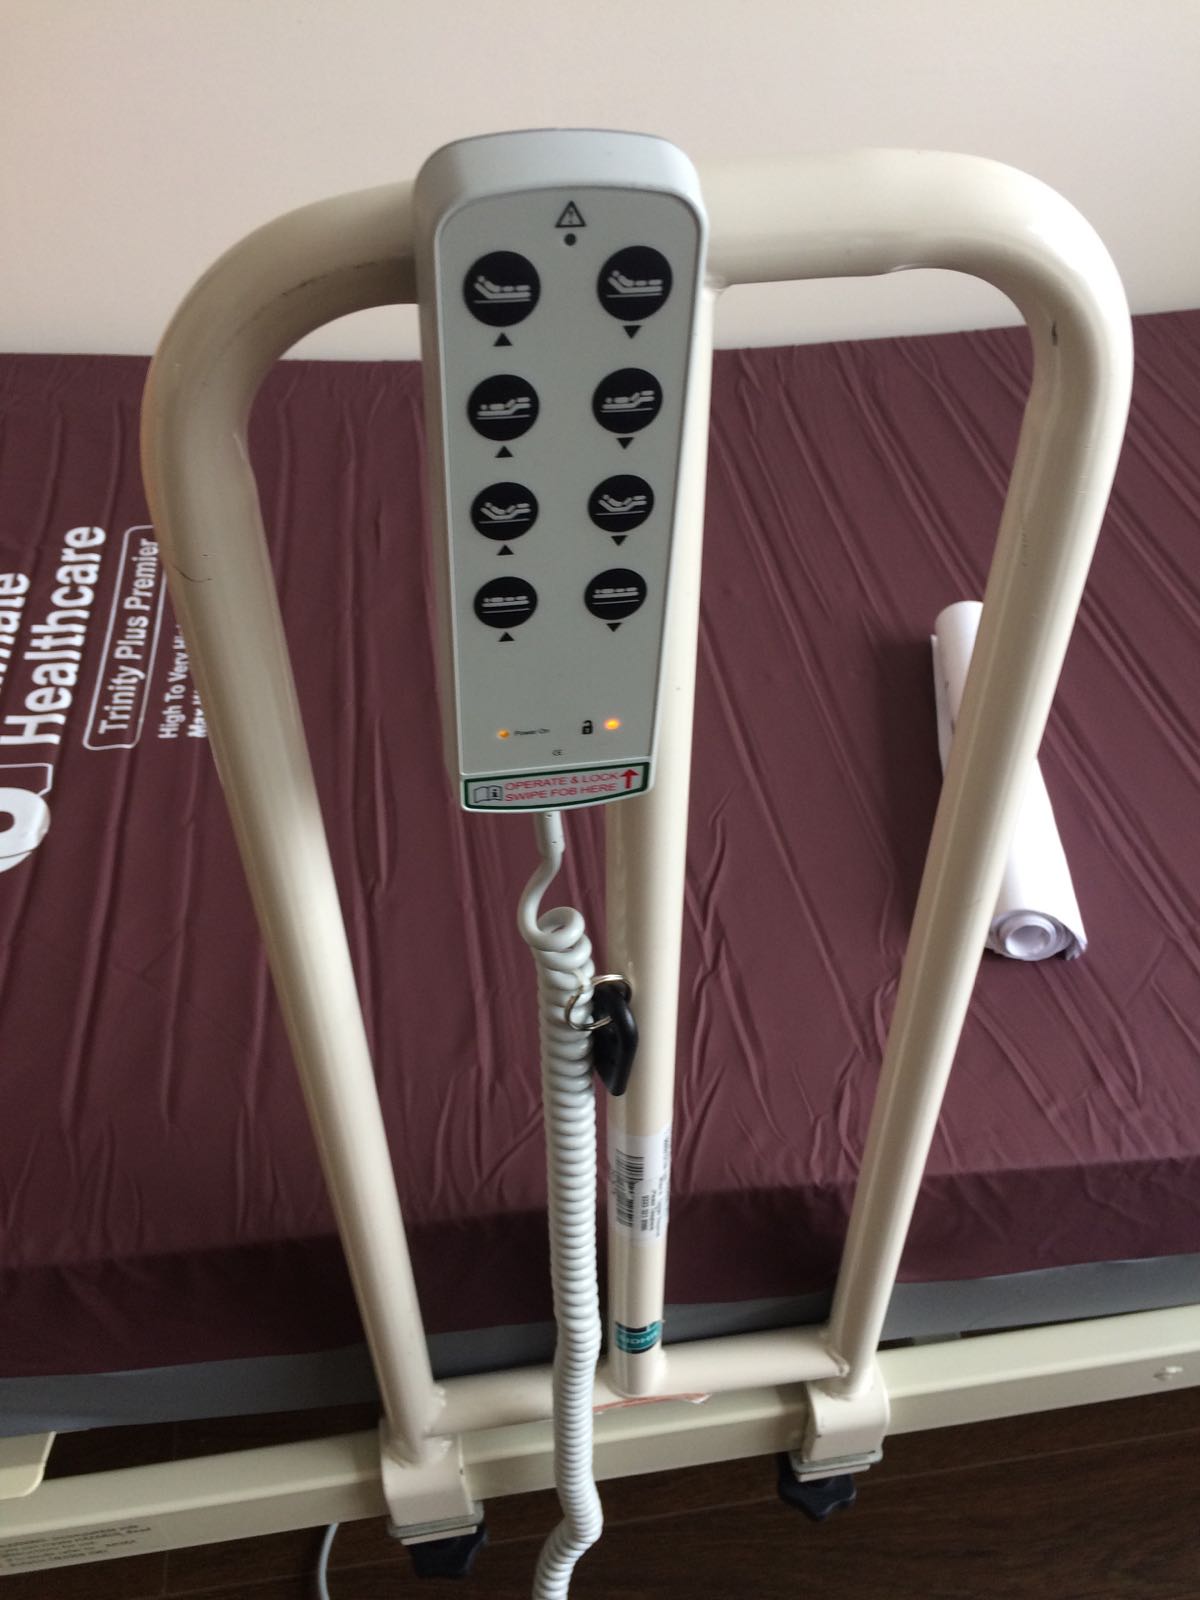 This bar helps me move up and out of the bed, while the buttons are used to move the bed itself. It helps both my head and legs move up while it can also move the bed itself up and down. A very helpful bit of kit!